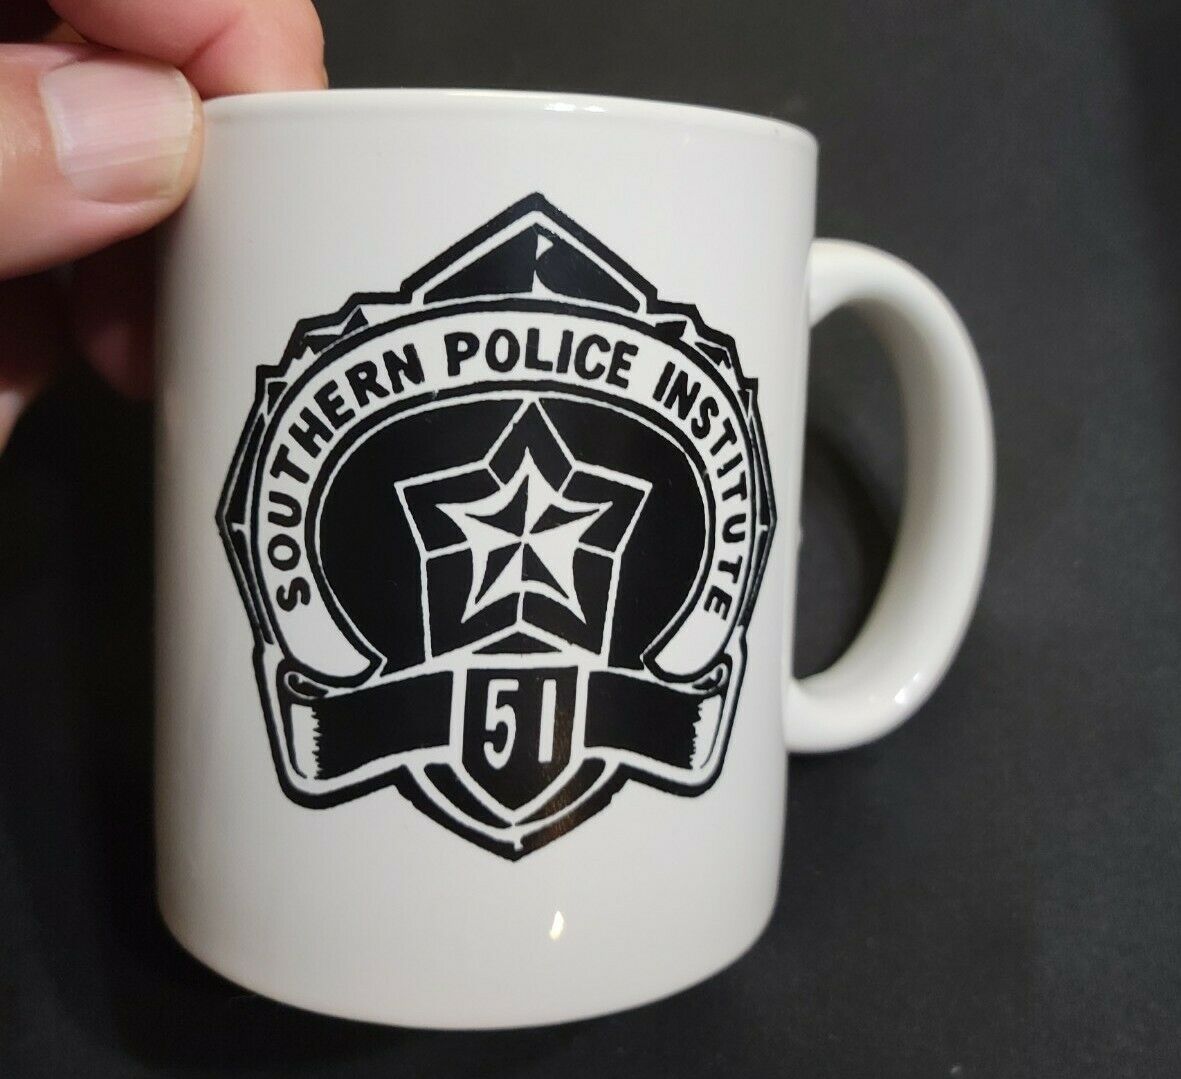 Southern Police Institute 51 Louisville KY B/W Coffee mug cup